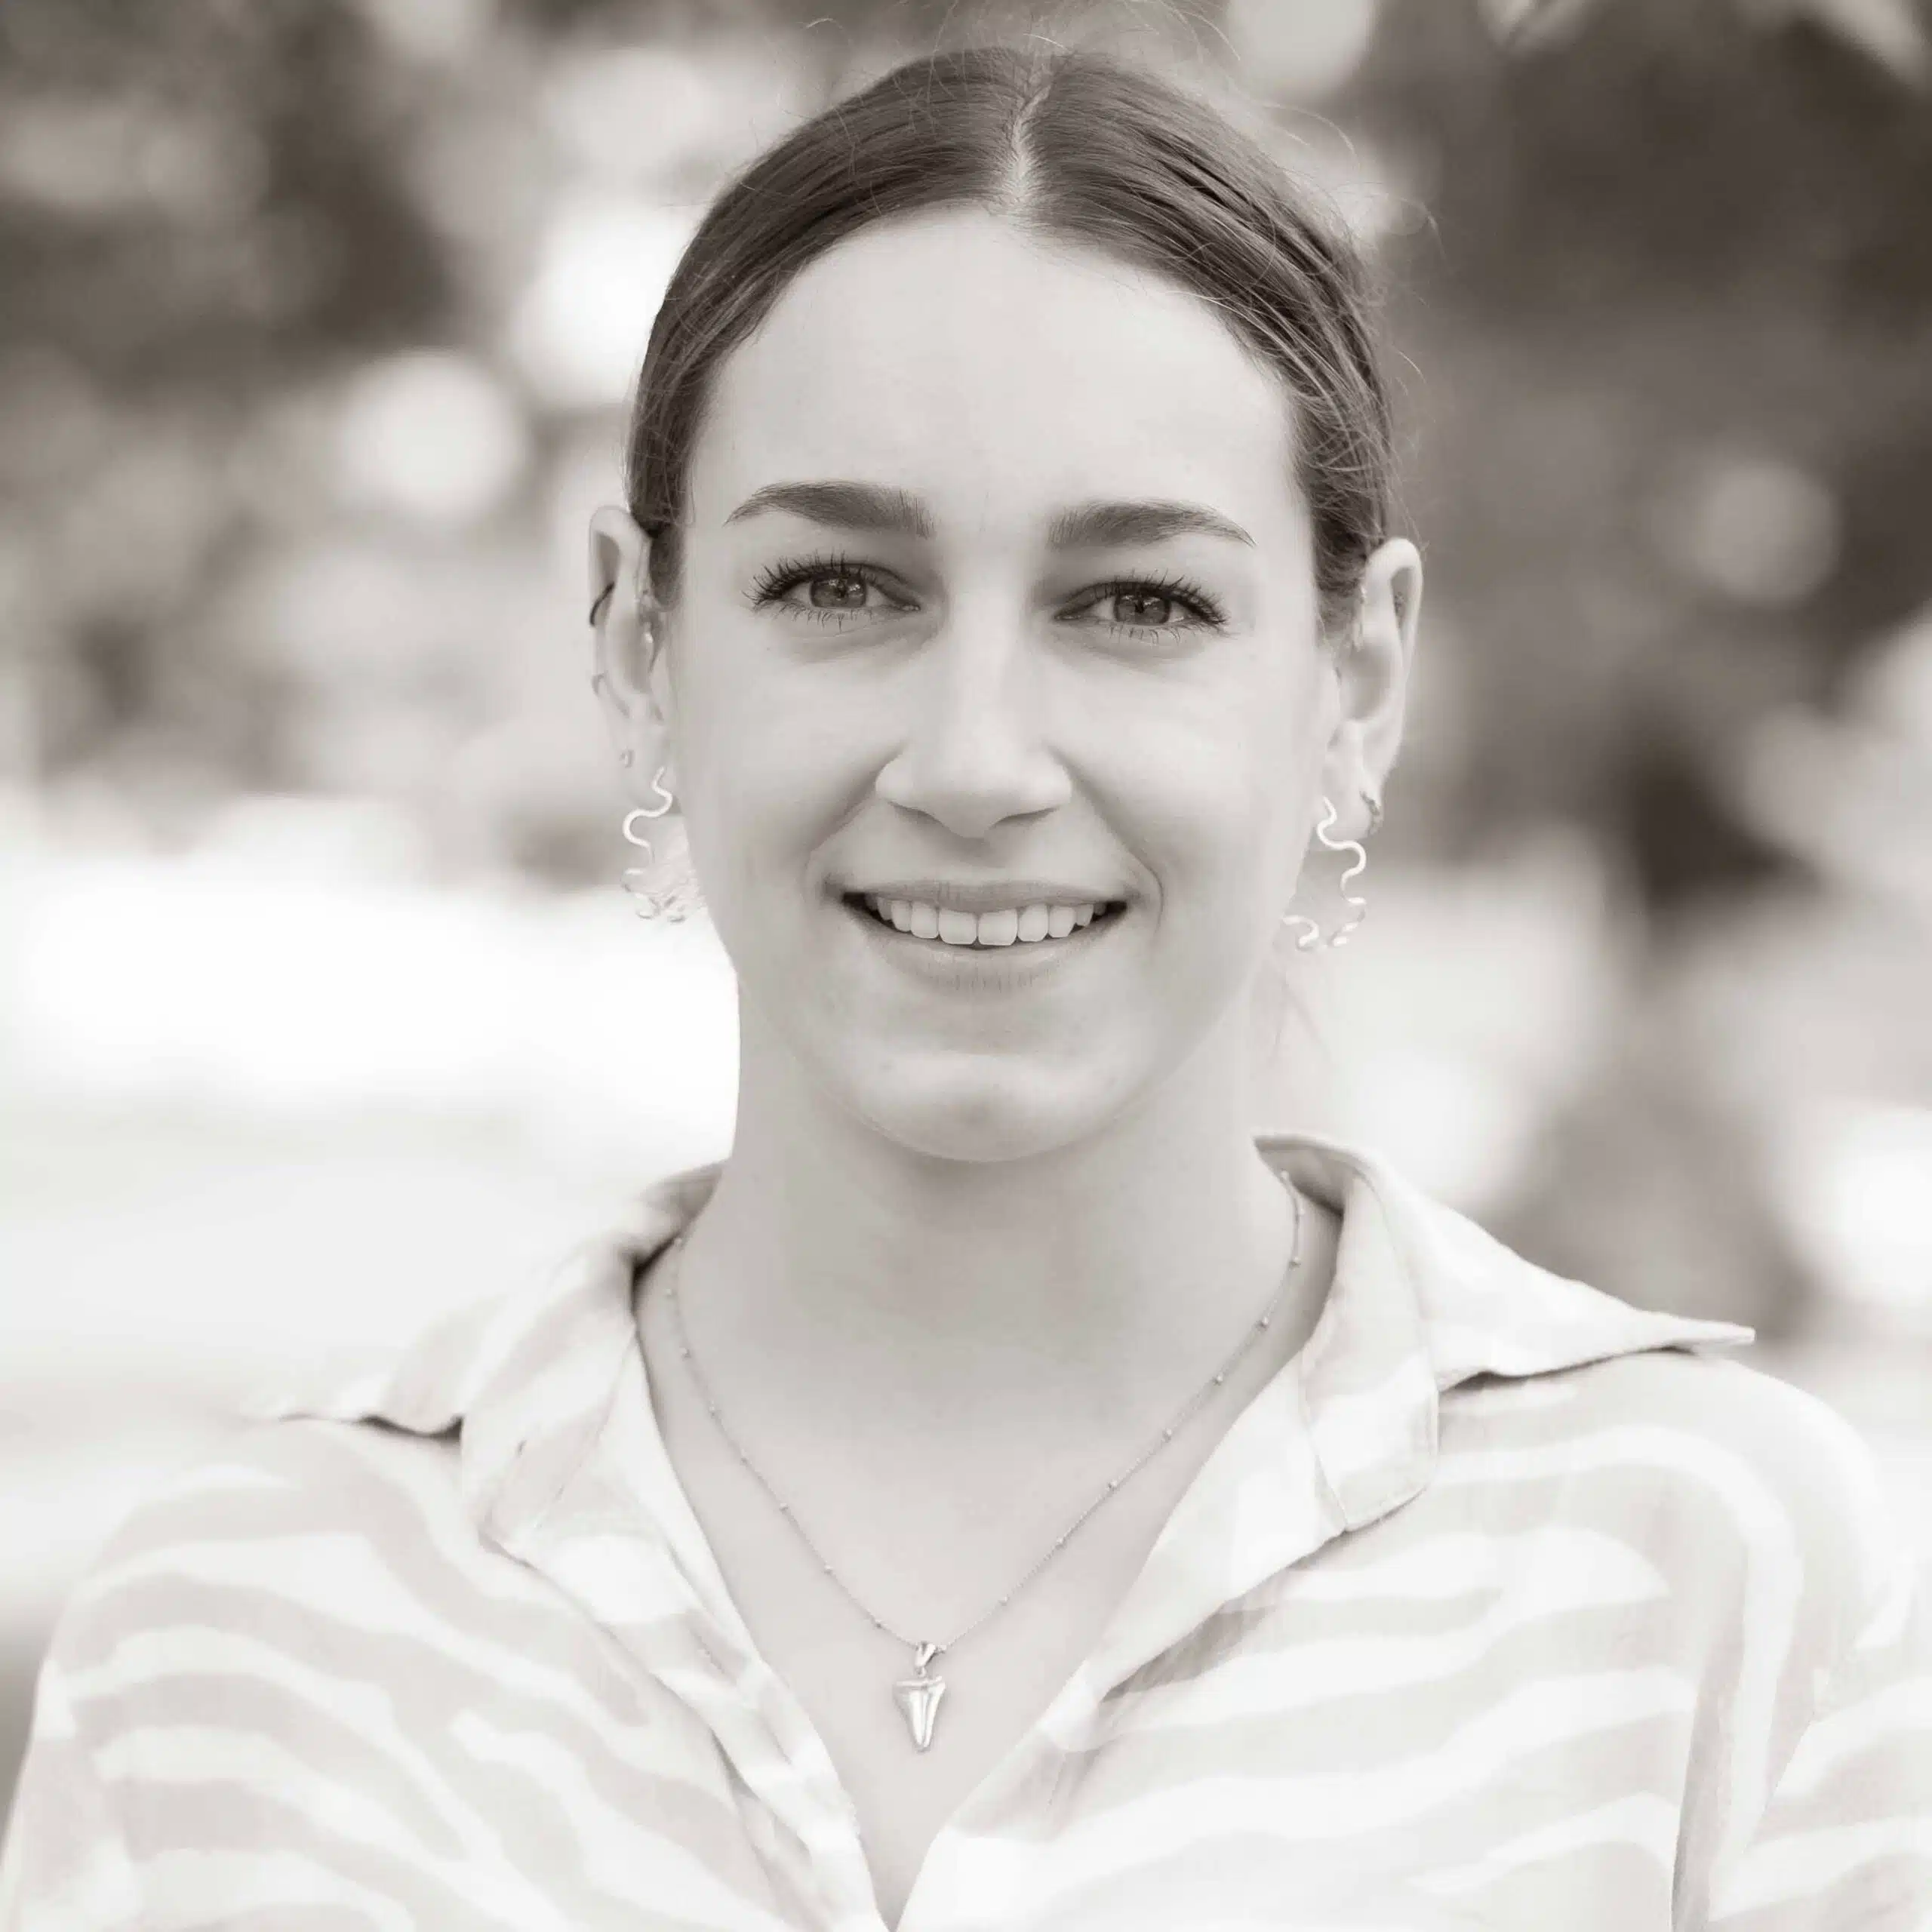 Eating Disorder Therapist, Bronte Eadie, working from Carlton, Melbourne